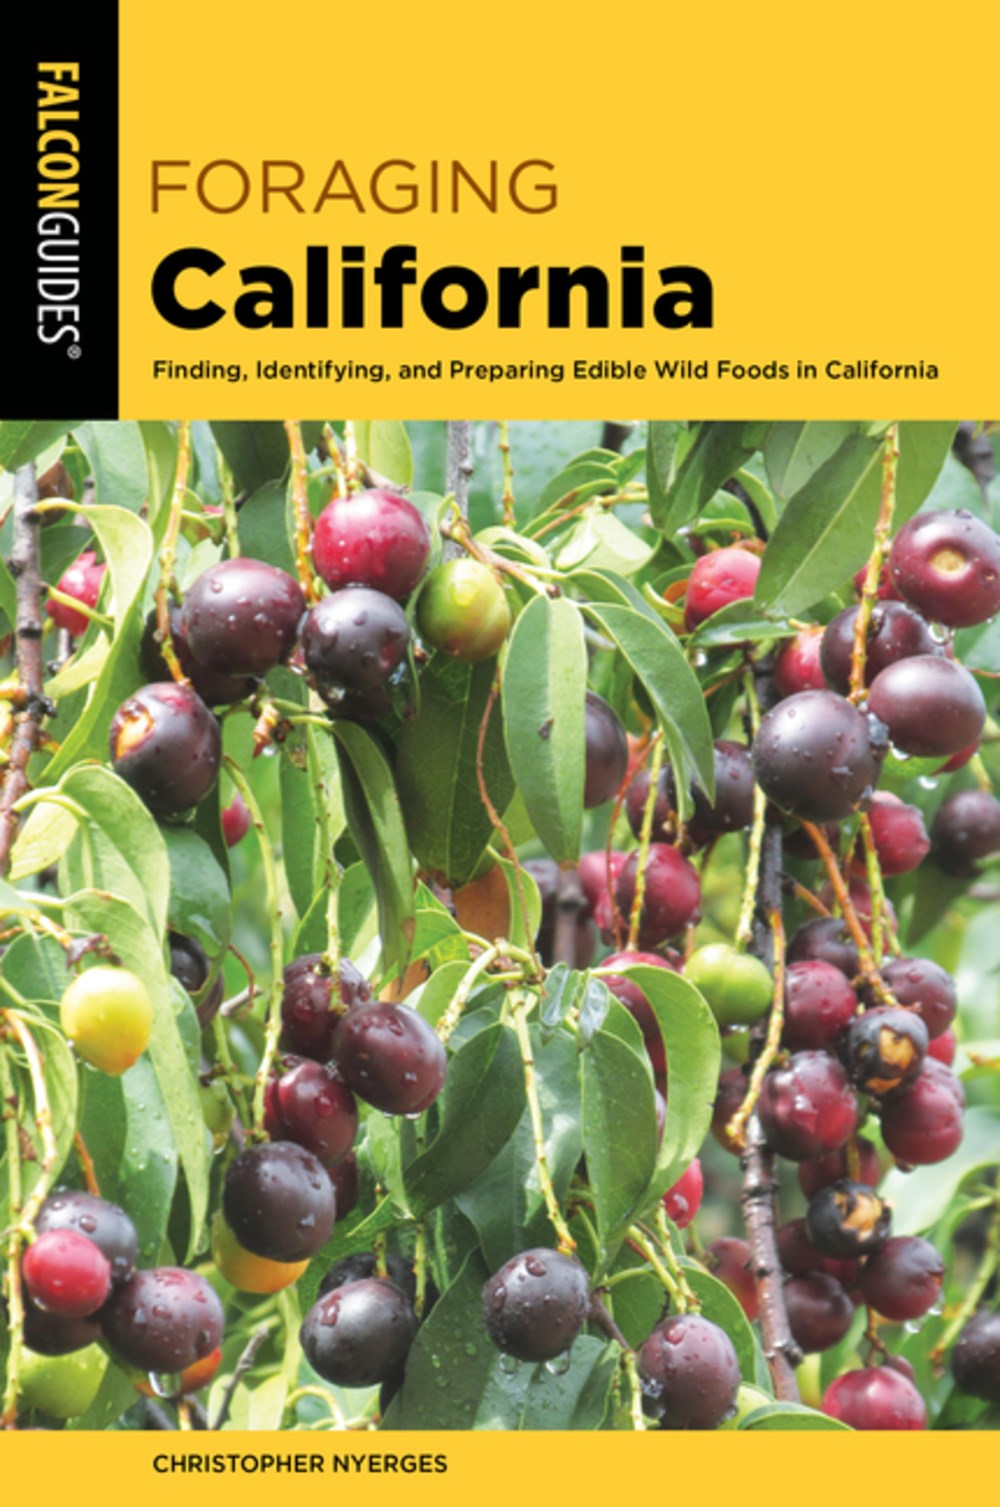 Foraging California: Finding, Identifying, And Preparing Edible Wild Foods In California (2nd Edition)